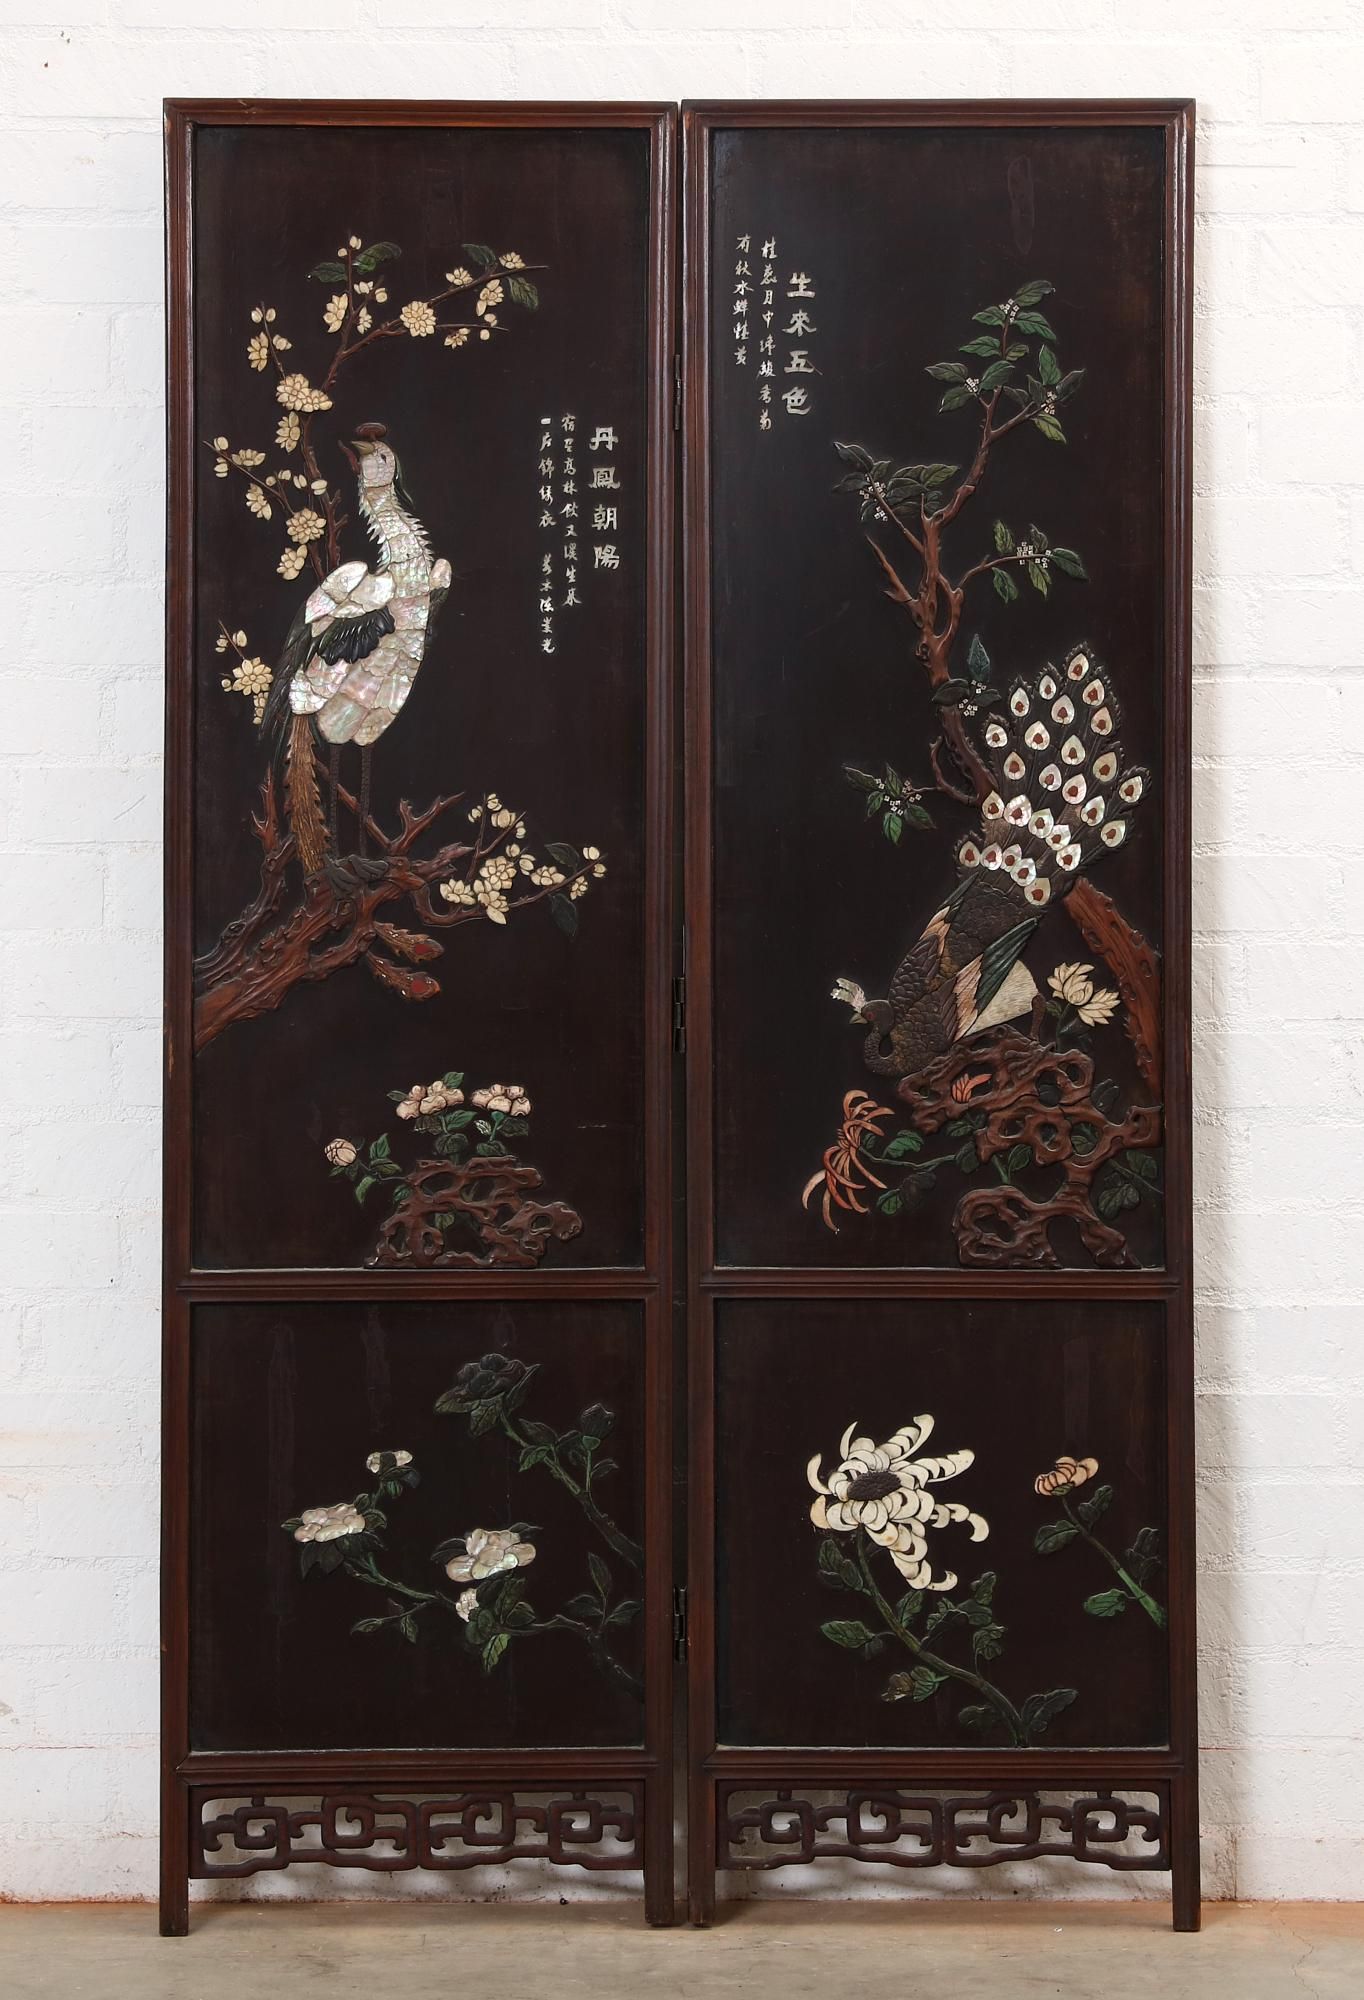 A LARGE TWO PANEL HARDSTONE INLAID